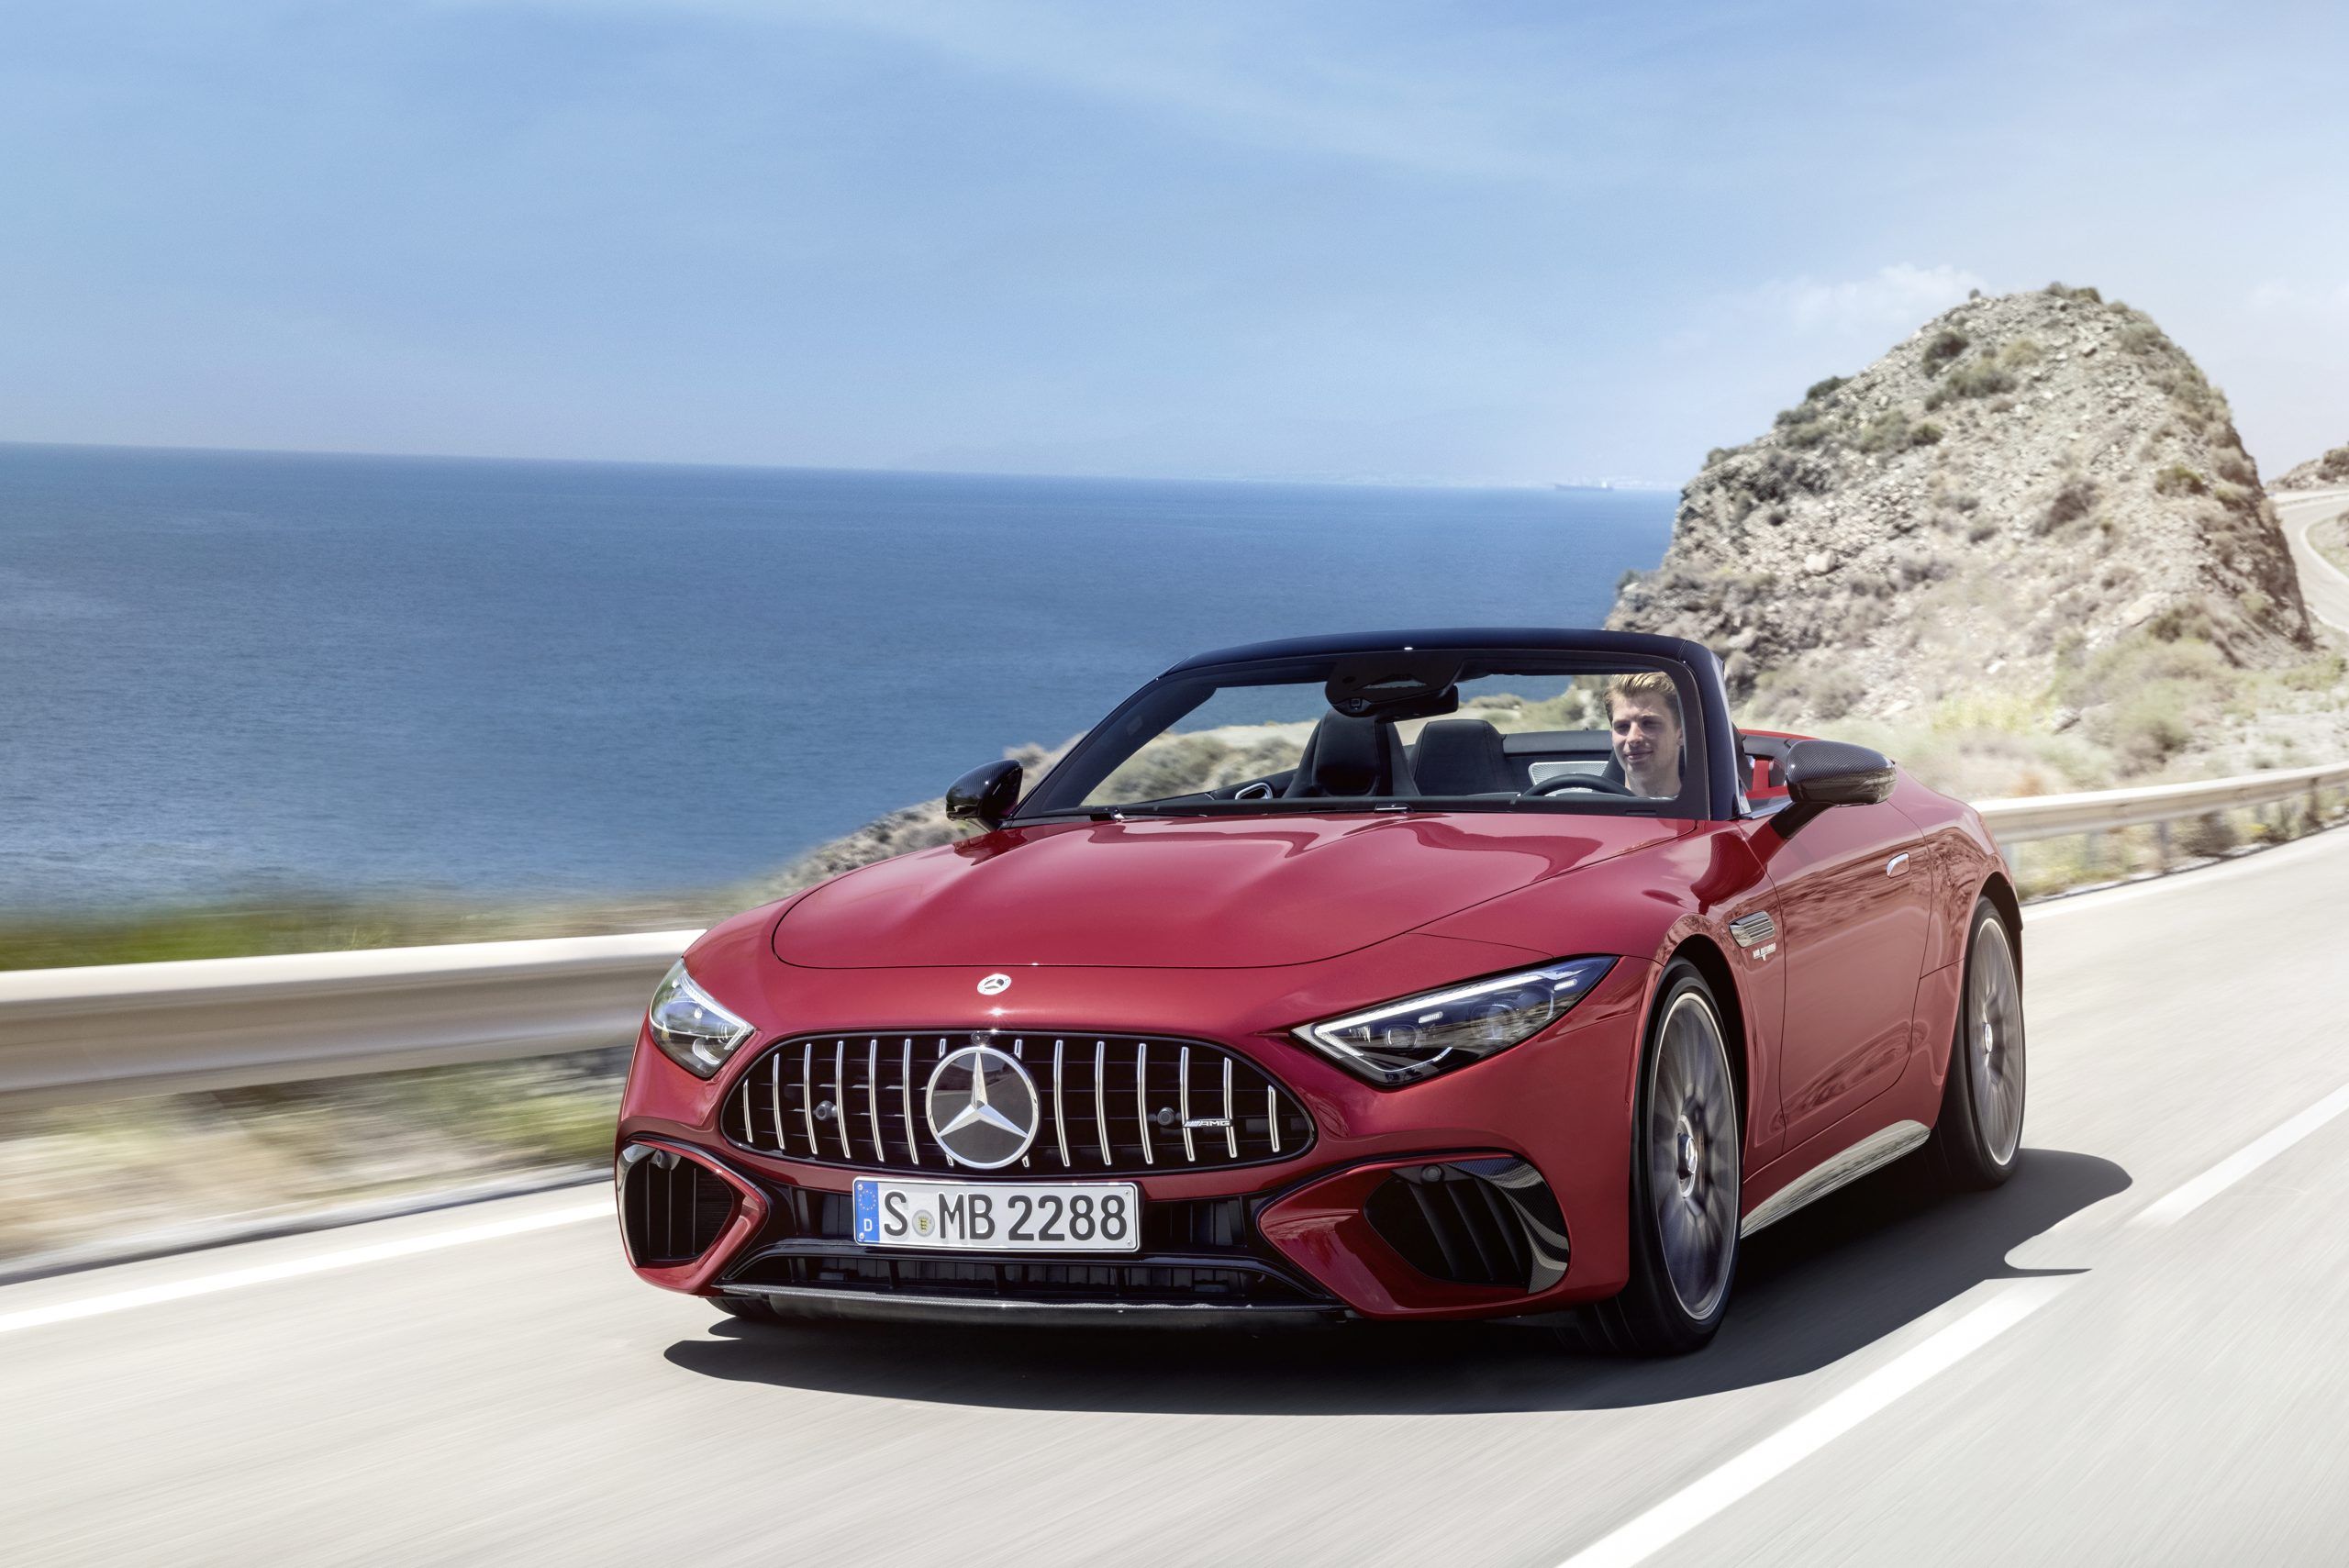 2022 Mercedes-AMG SL fits in more passengers, performance, and tech